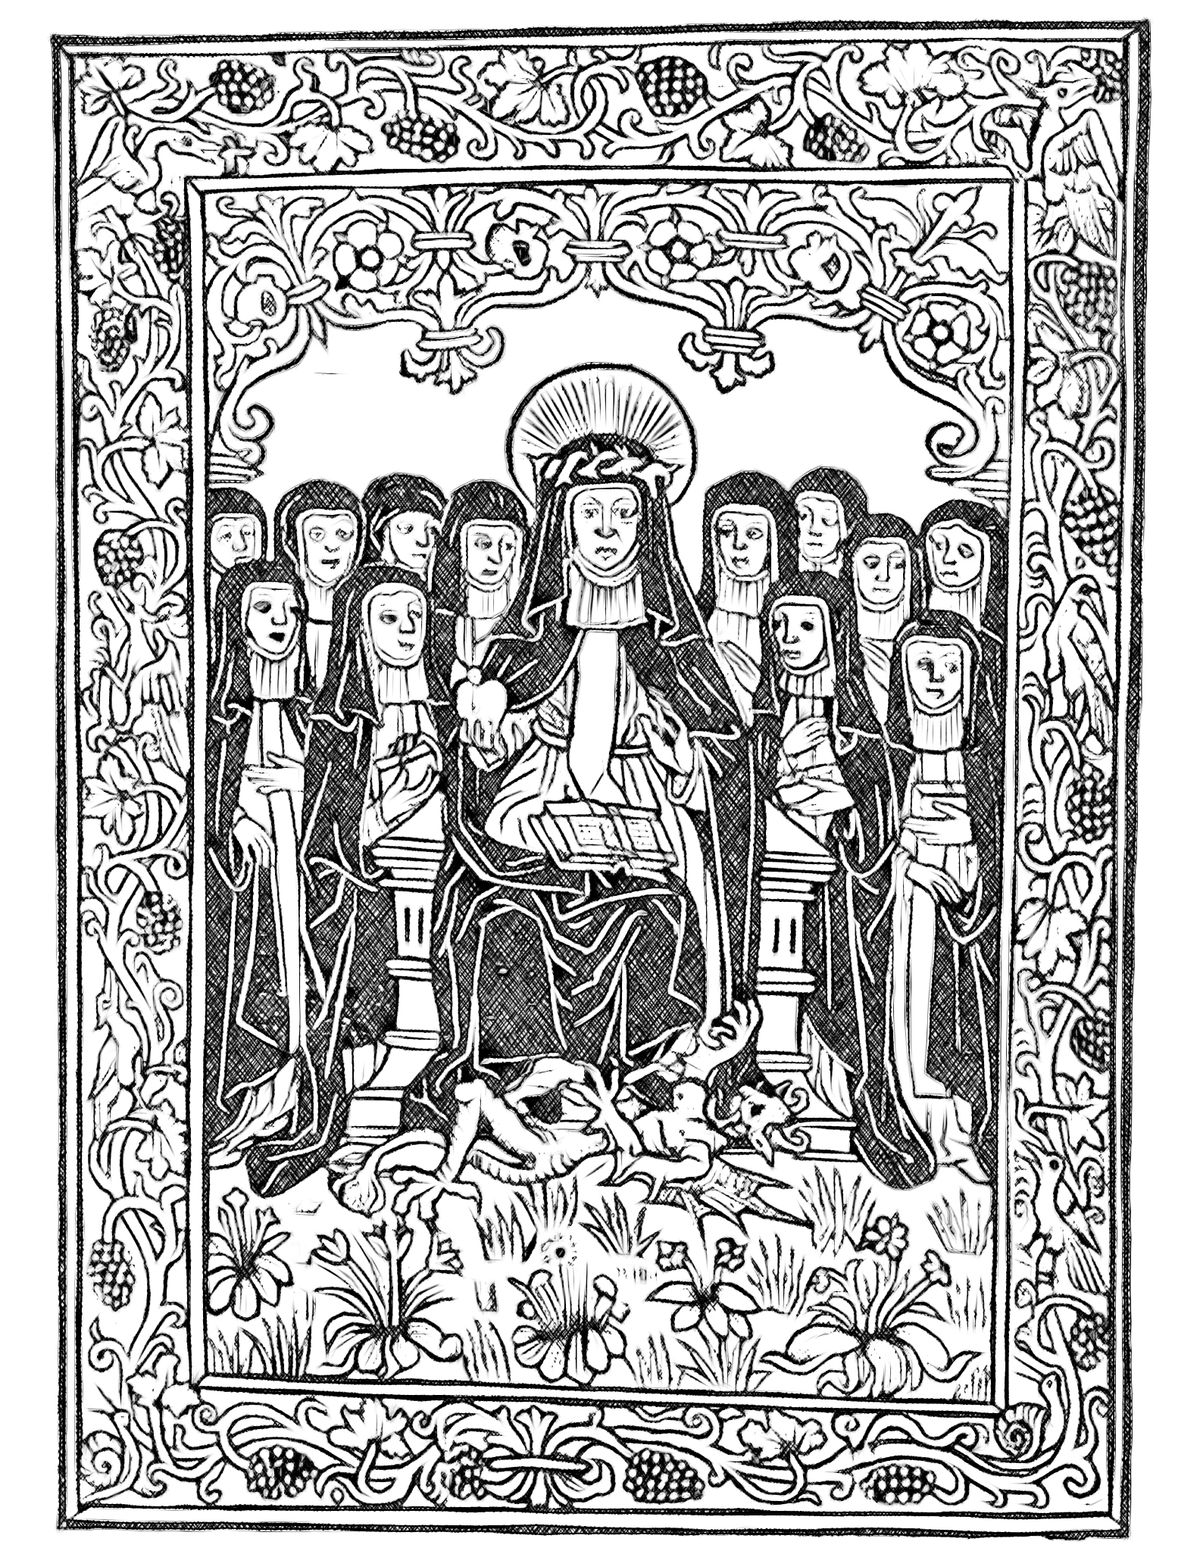 Catherine of Siena with Dominican Nuns - Catholic Coloring Page